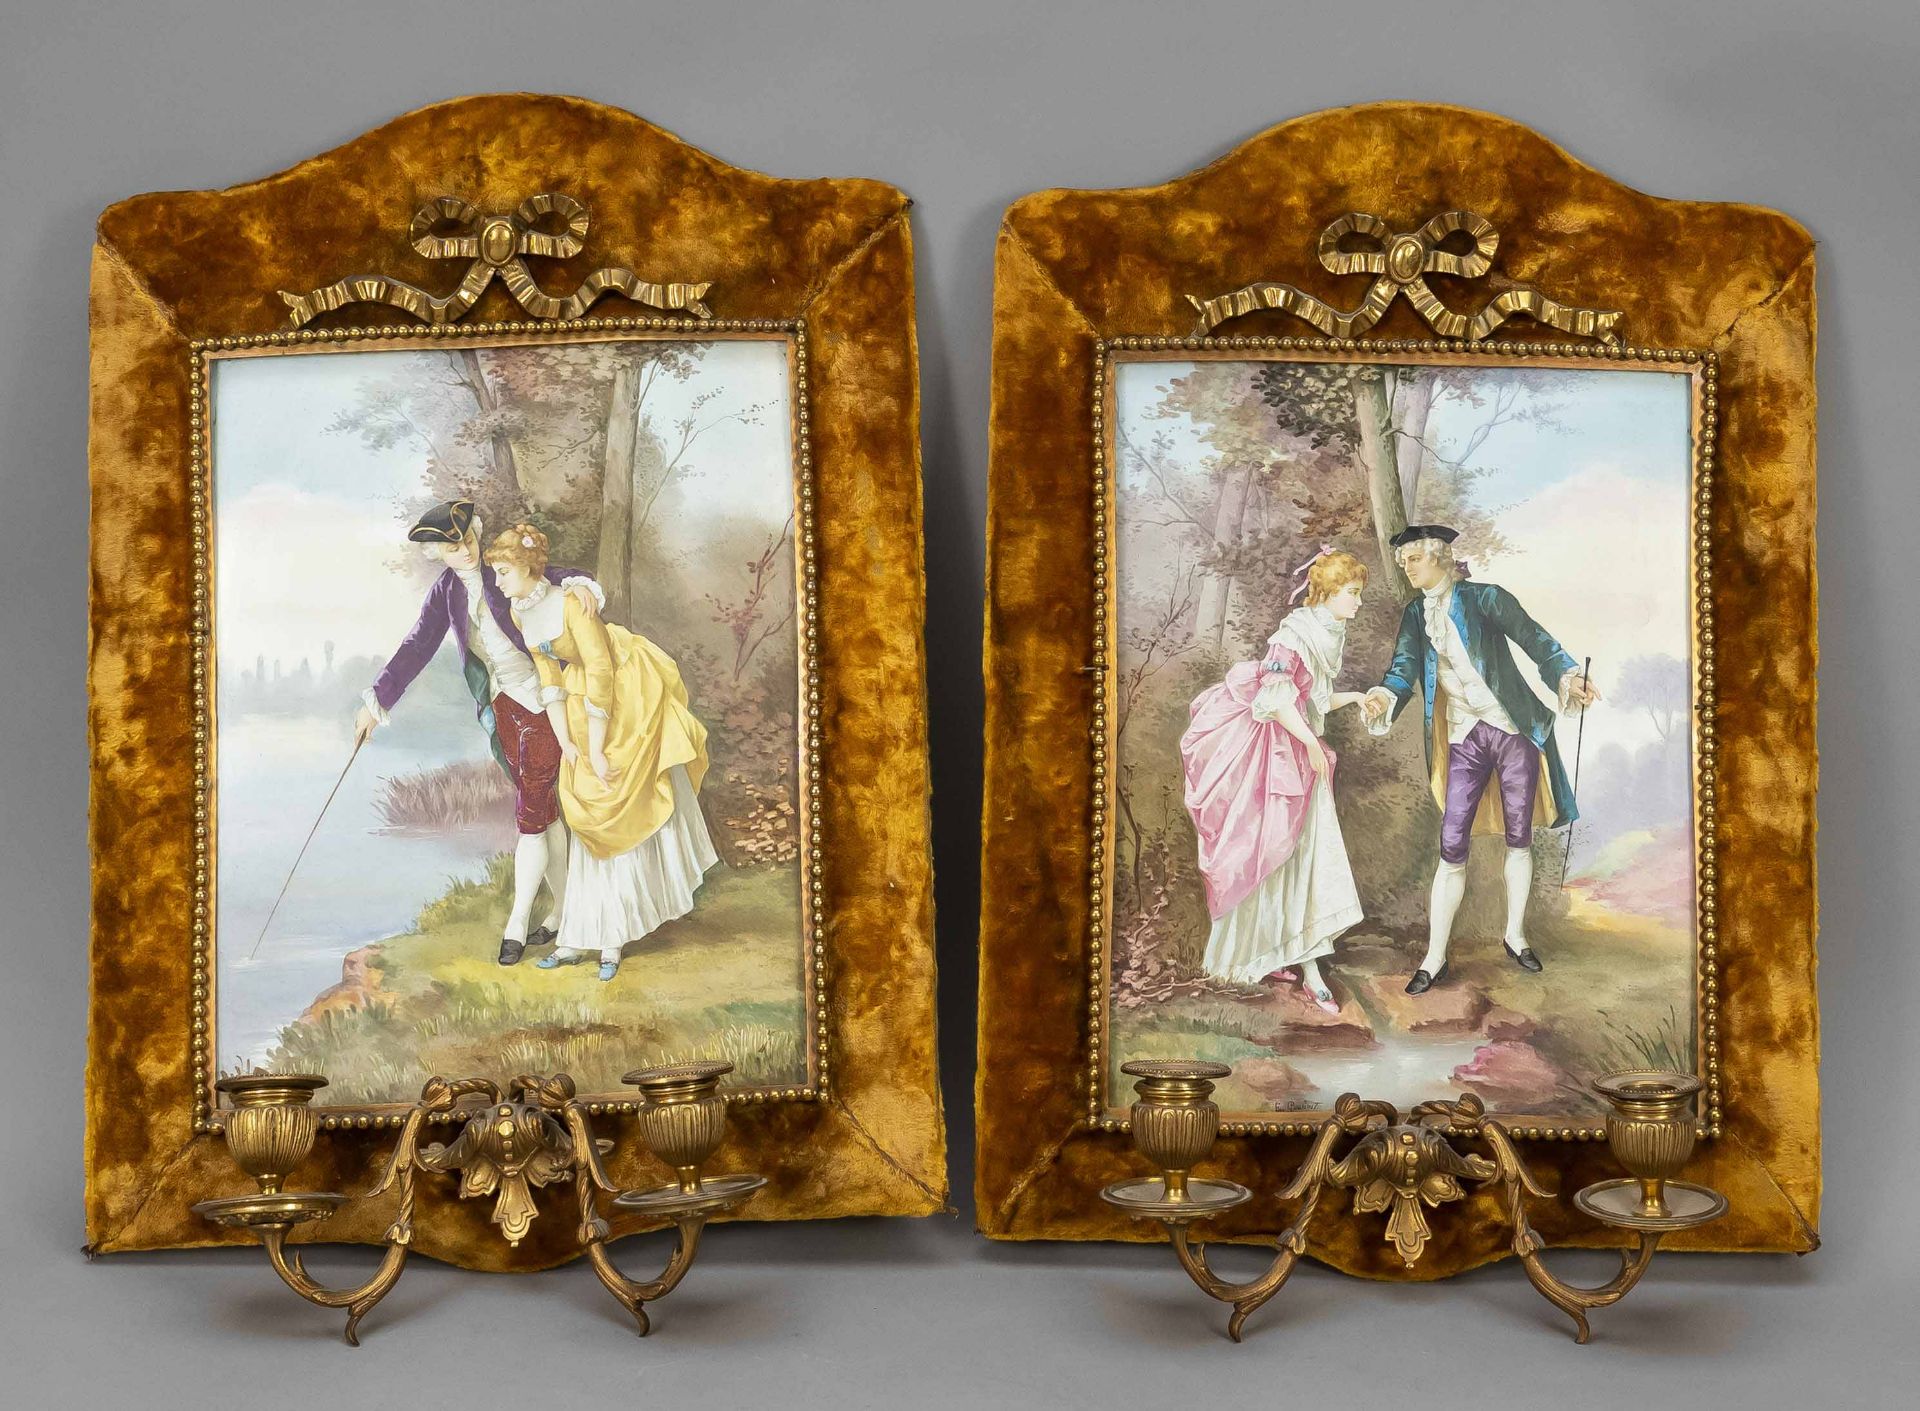 Pair of wall appliques, France, 19th c., porcelain plates with gallant couples, u. signed, E.